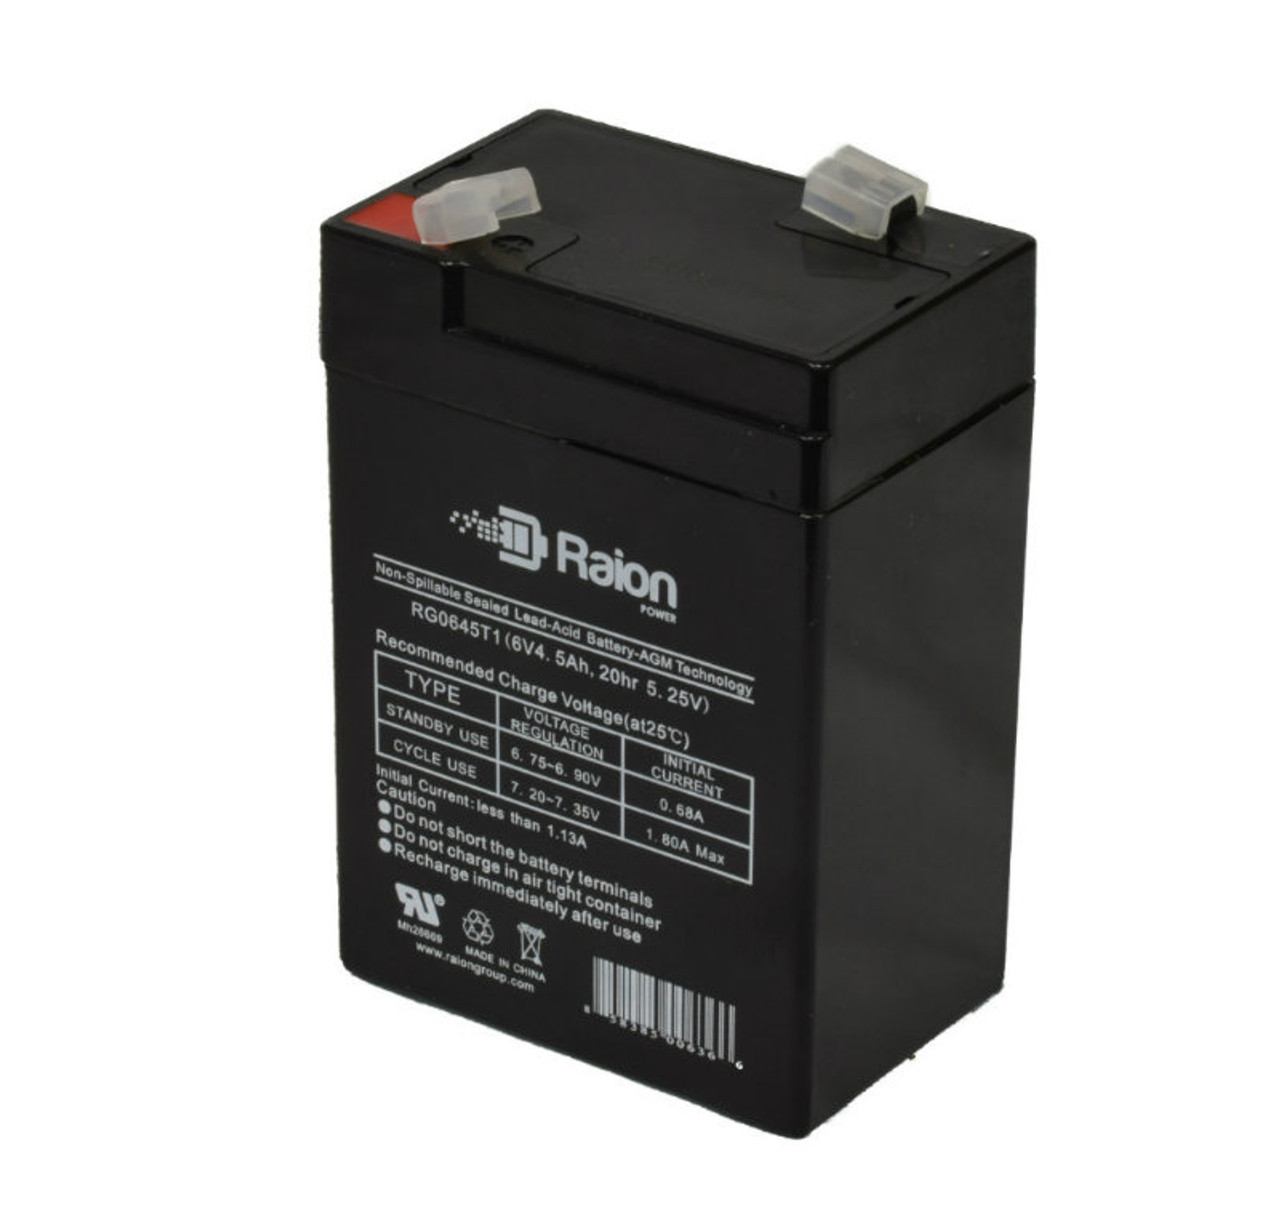 Raion Power RG0645T1 6V 4.5Ah Replacement UPS Battery Cartridge for Unison 600 UPS